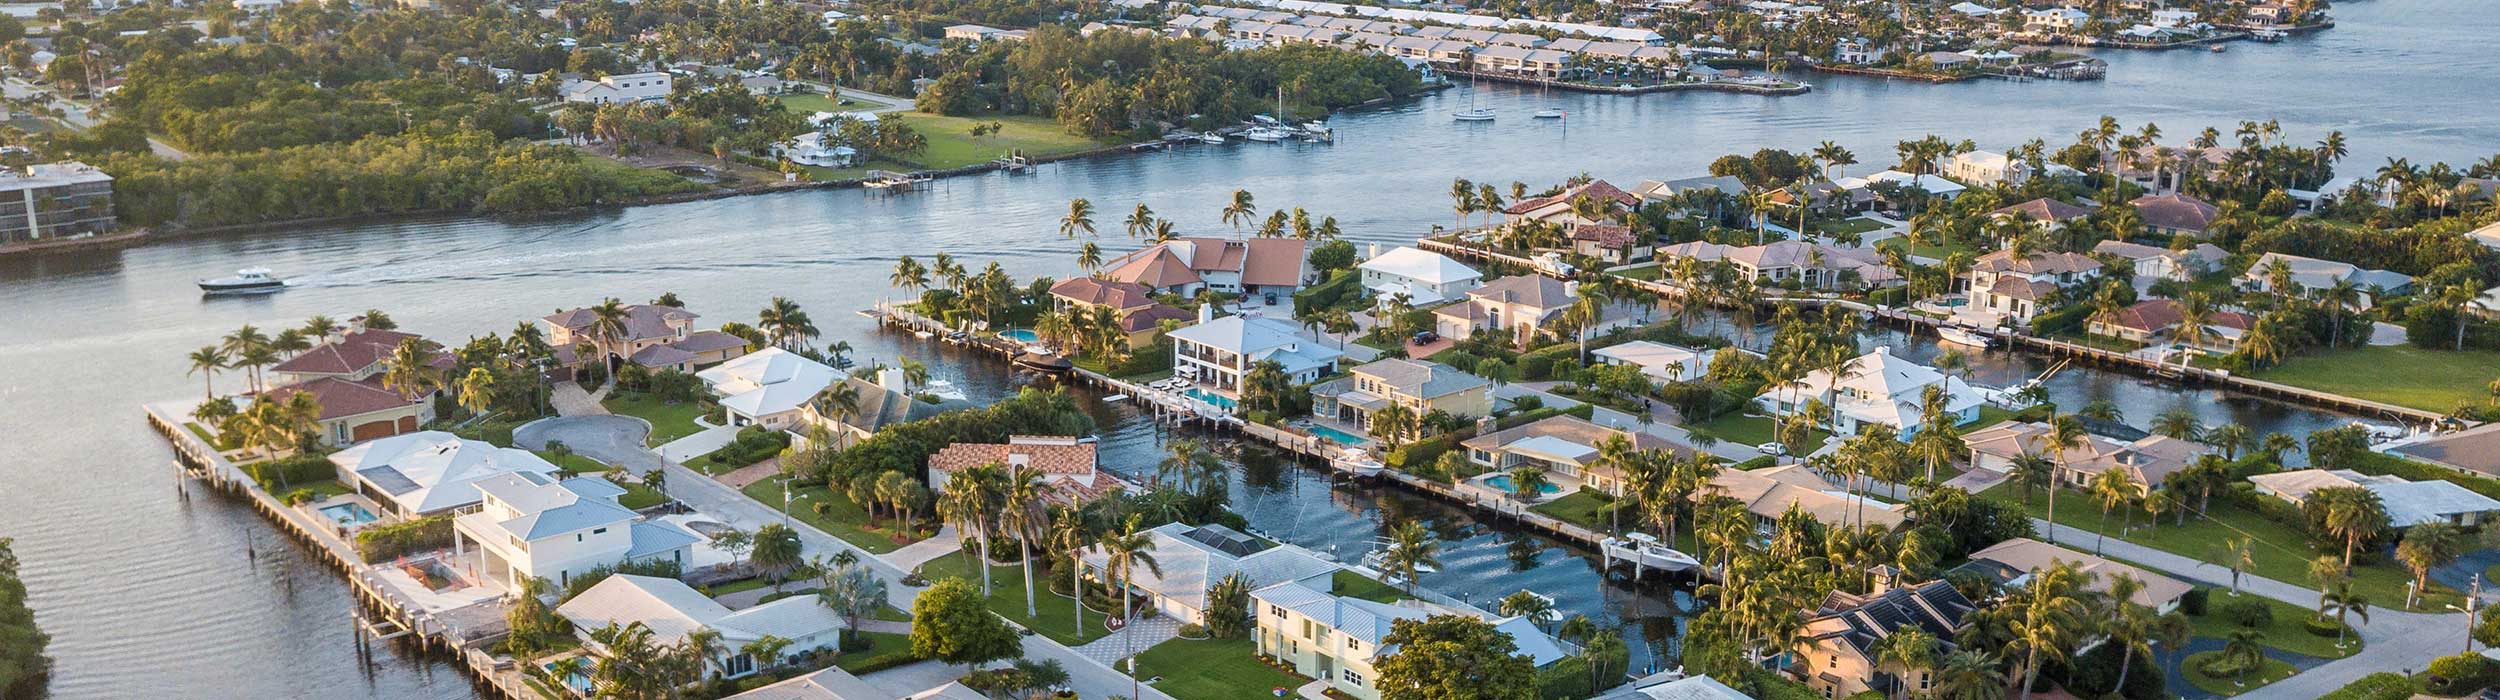 Southwest Florida homes on a canal with water access